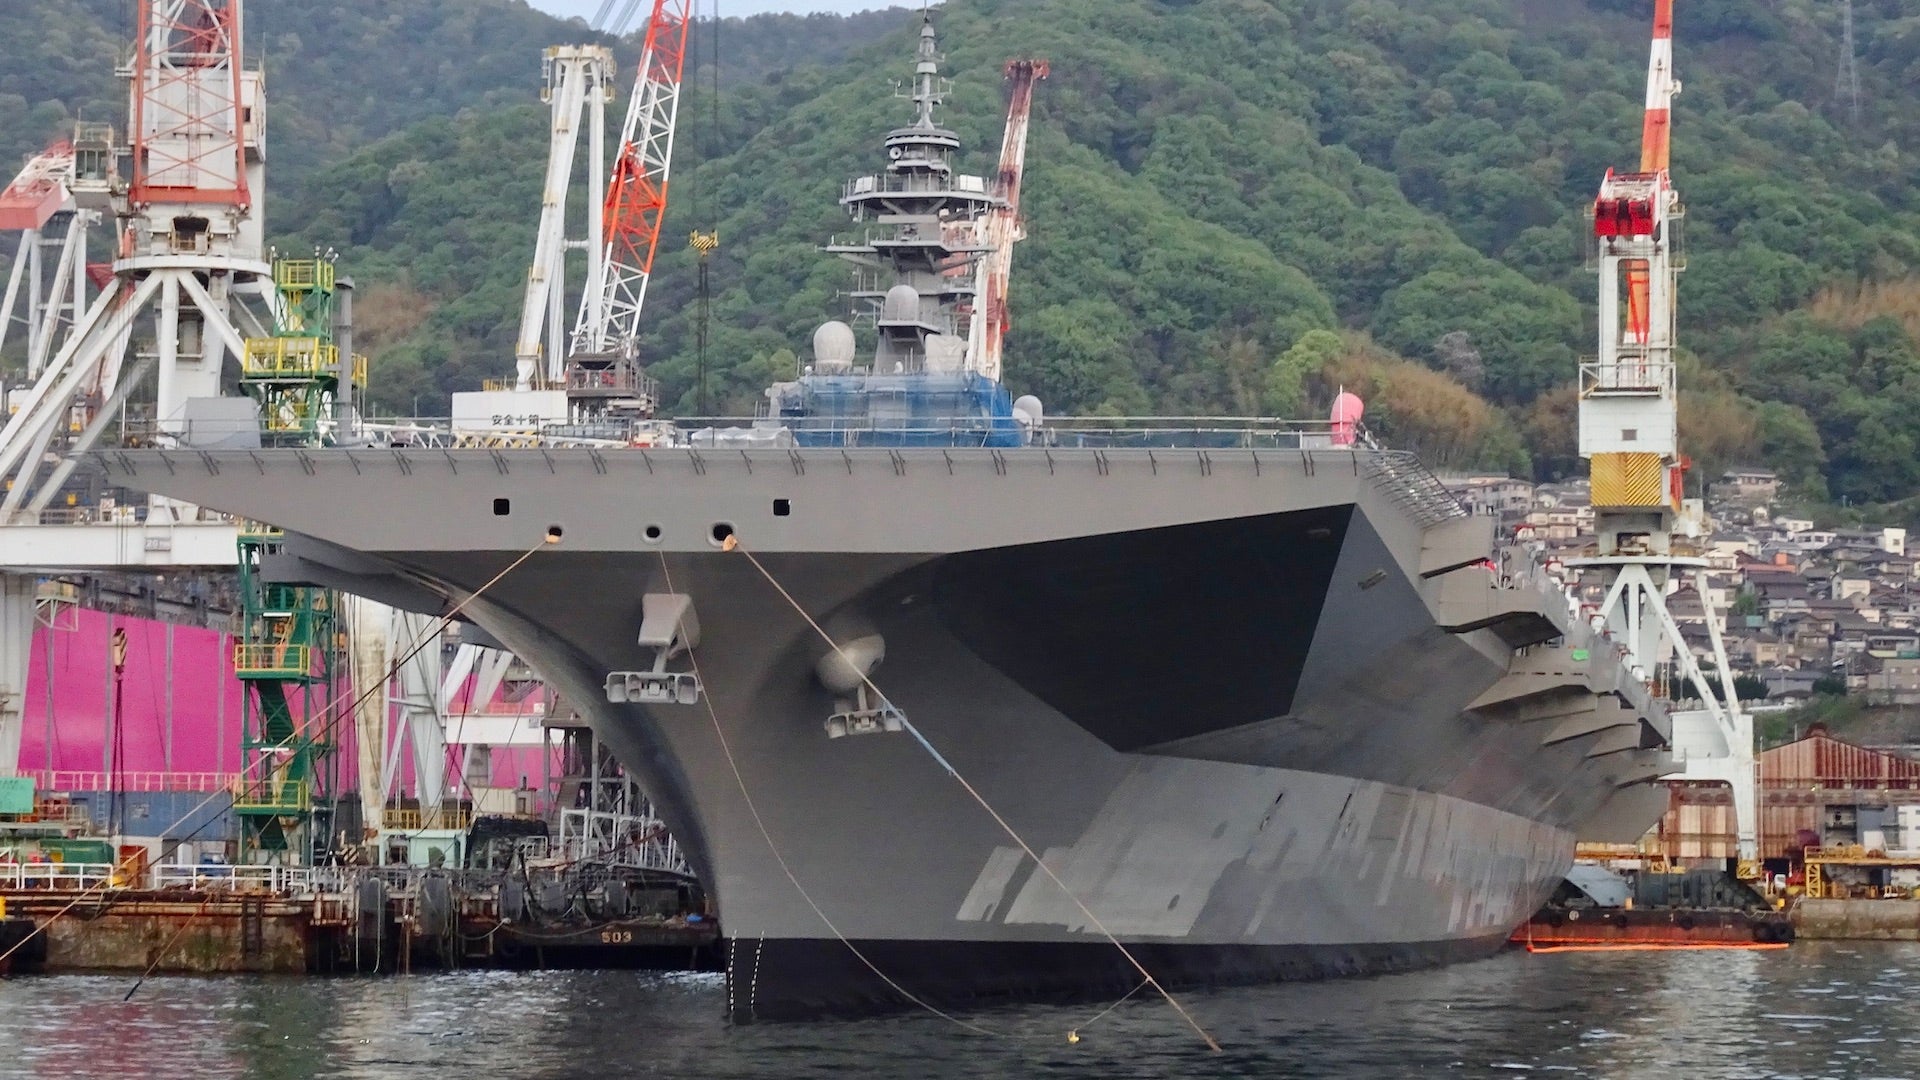 Japan's Converted F-35B Carrier Leaves Dock Sporting New Bow